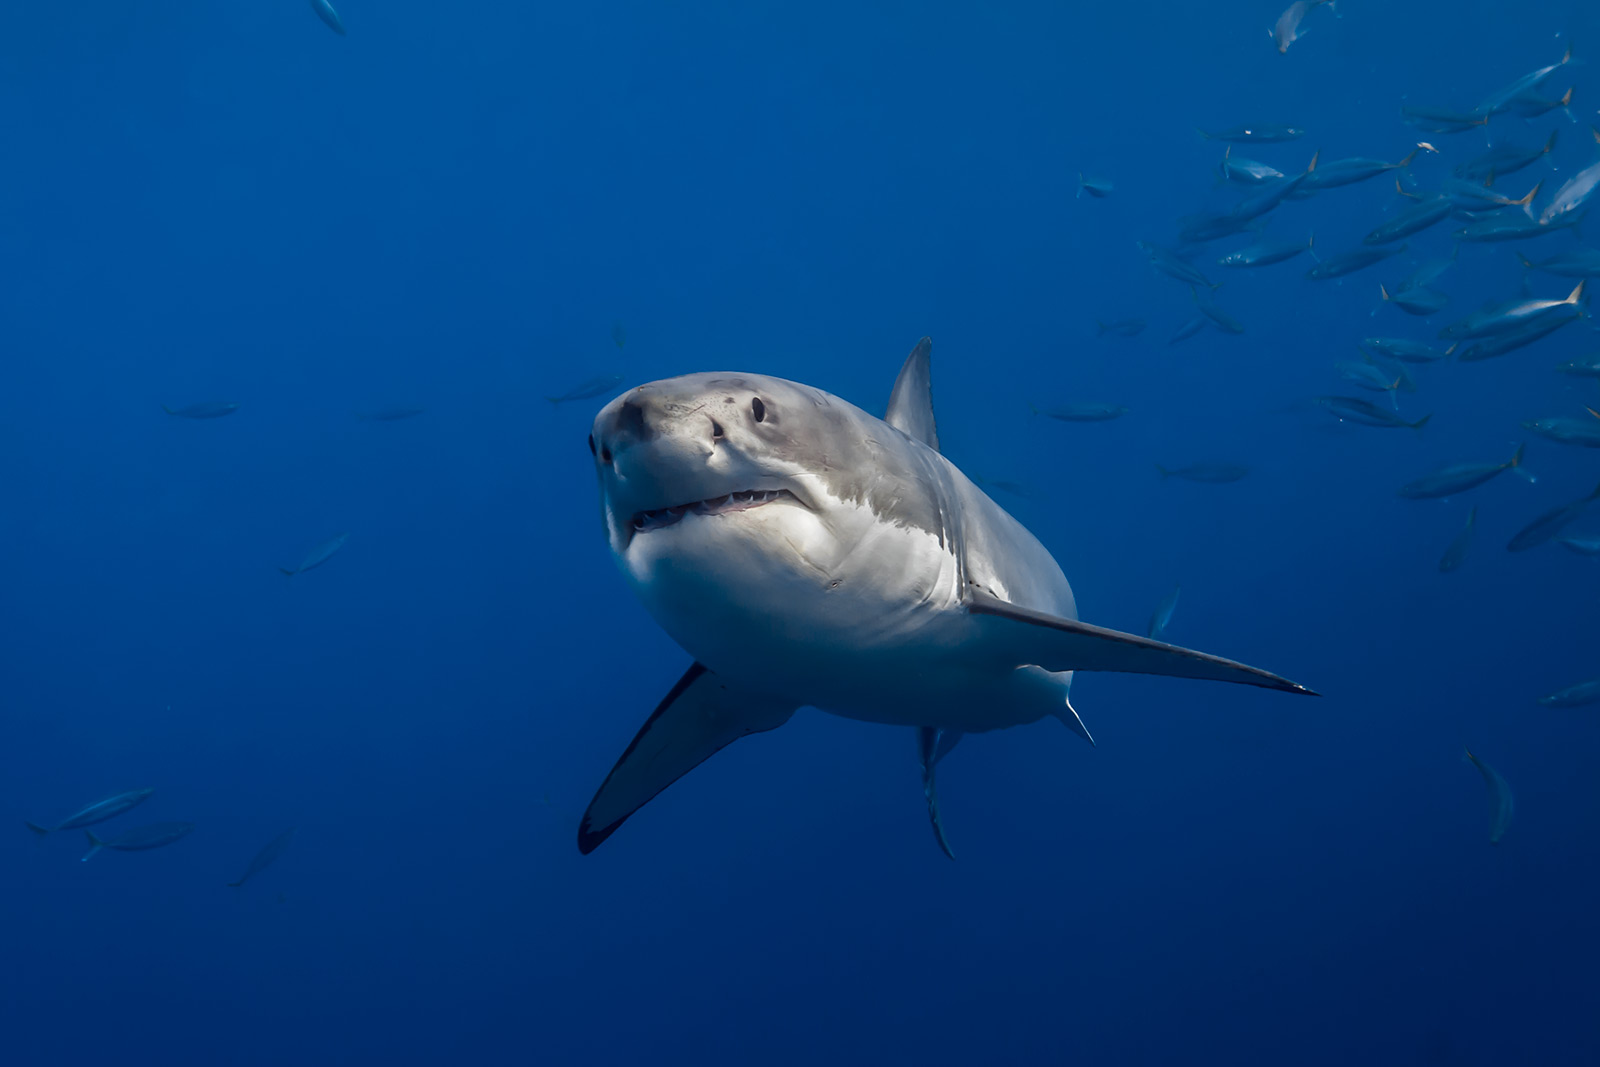 Great white shark swimming - by George T. Probst